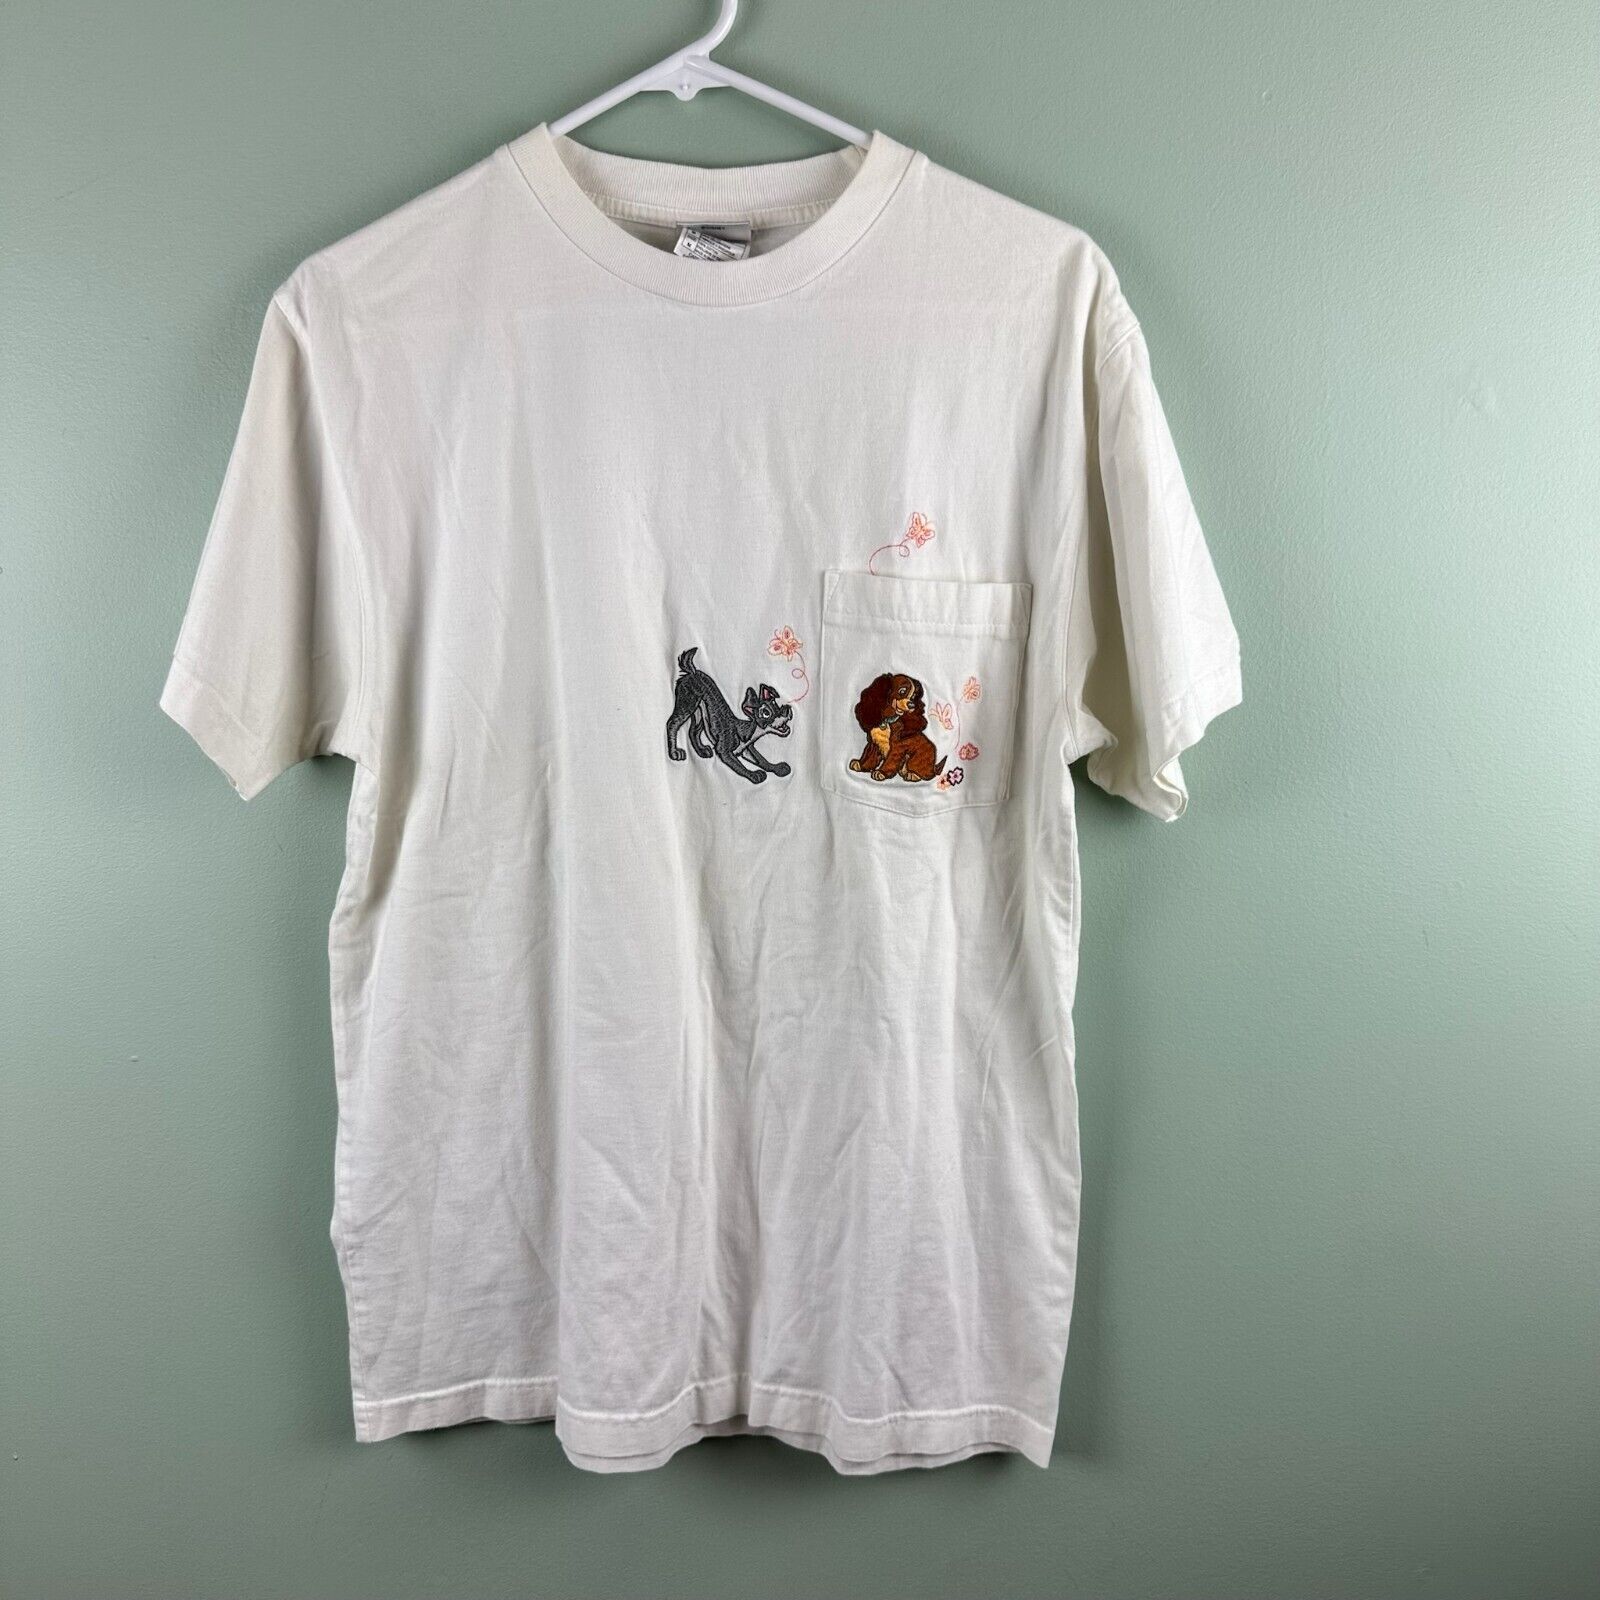 Vintage Disney Store LADY and the TRAMP Embroidered White T Shirt Size Medium